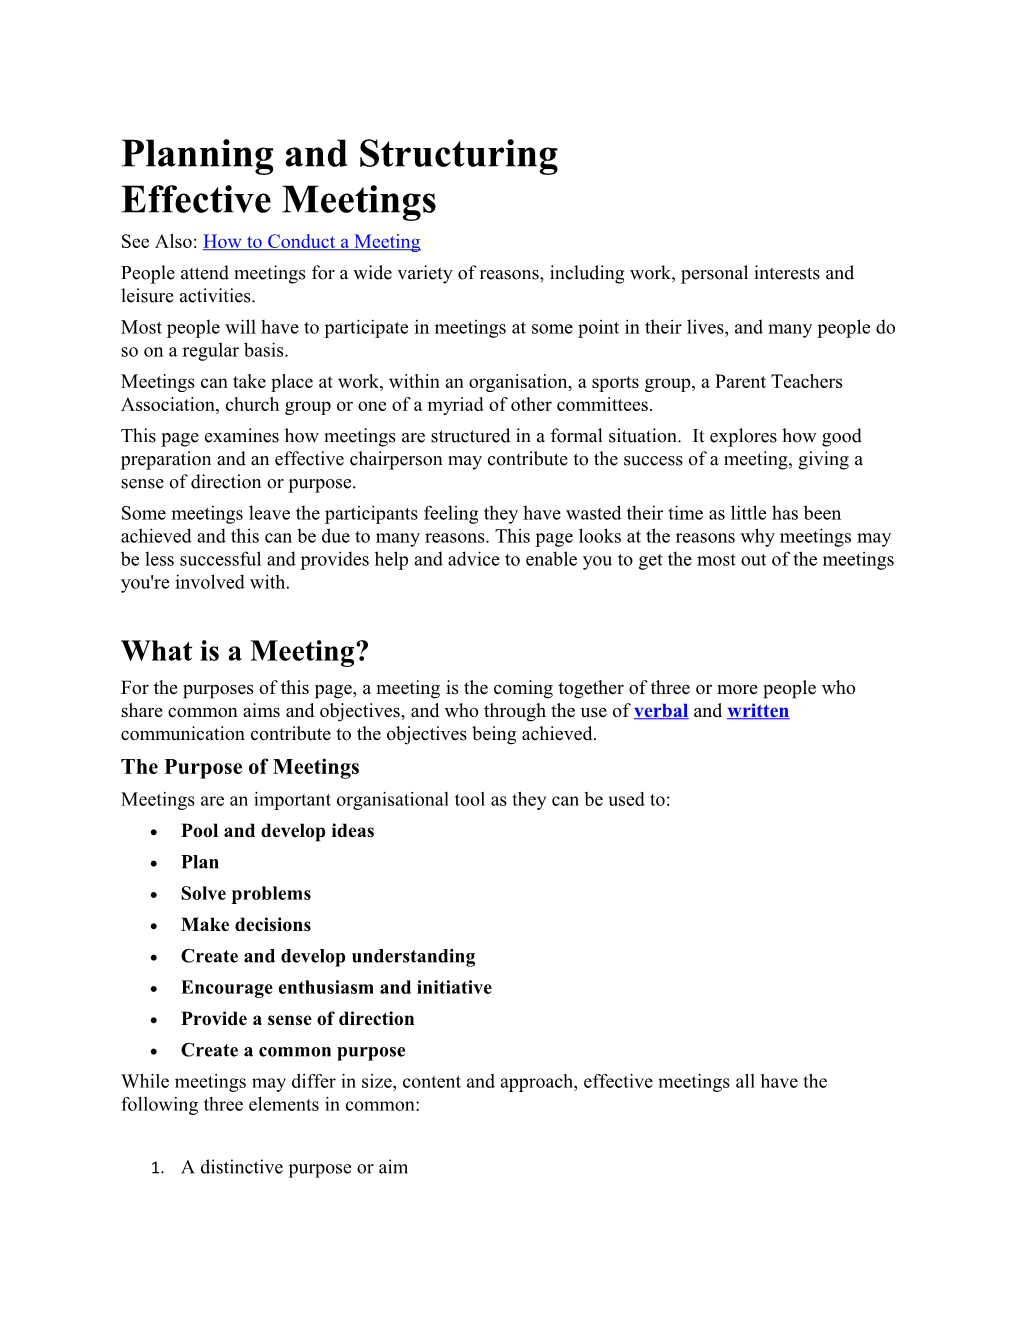 Planning and Structuring Effective Meetings